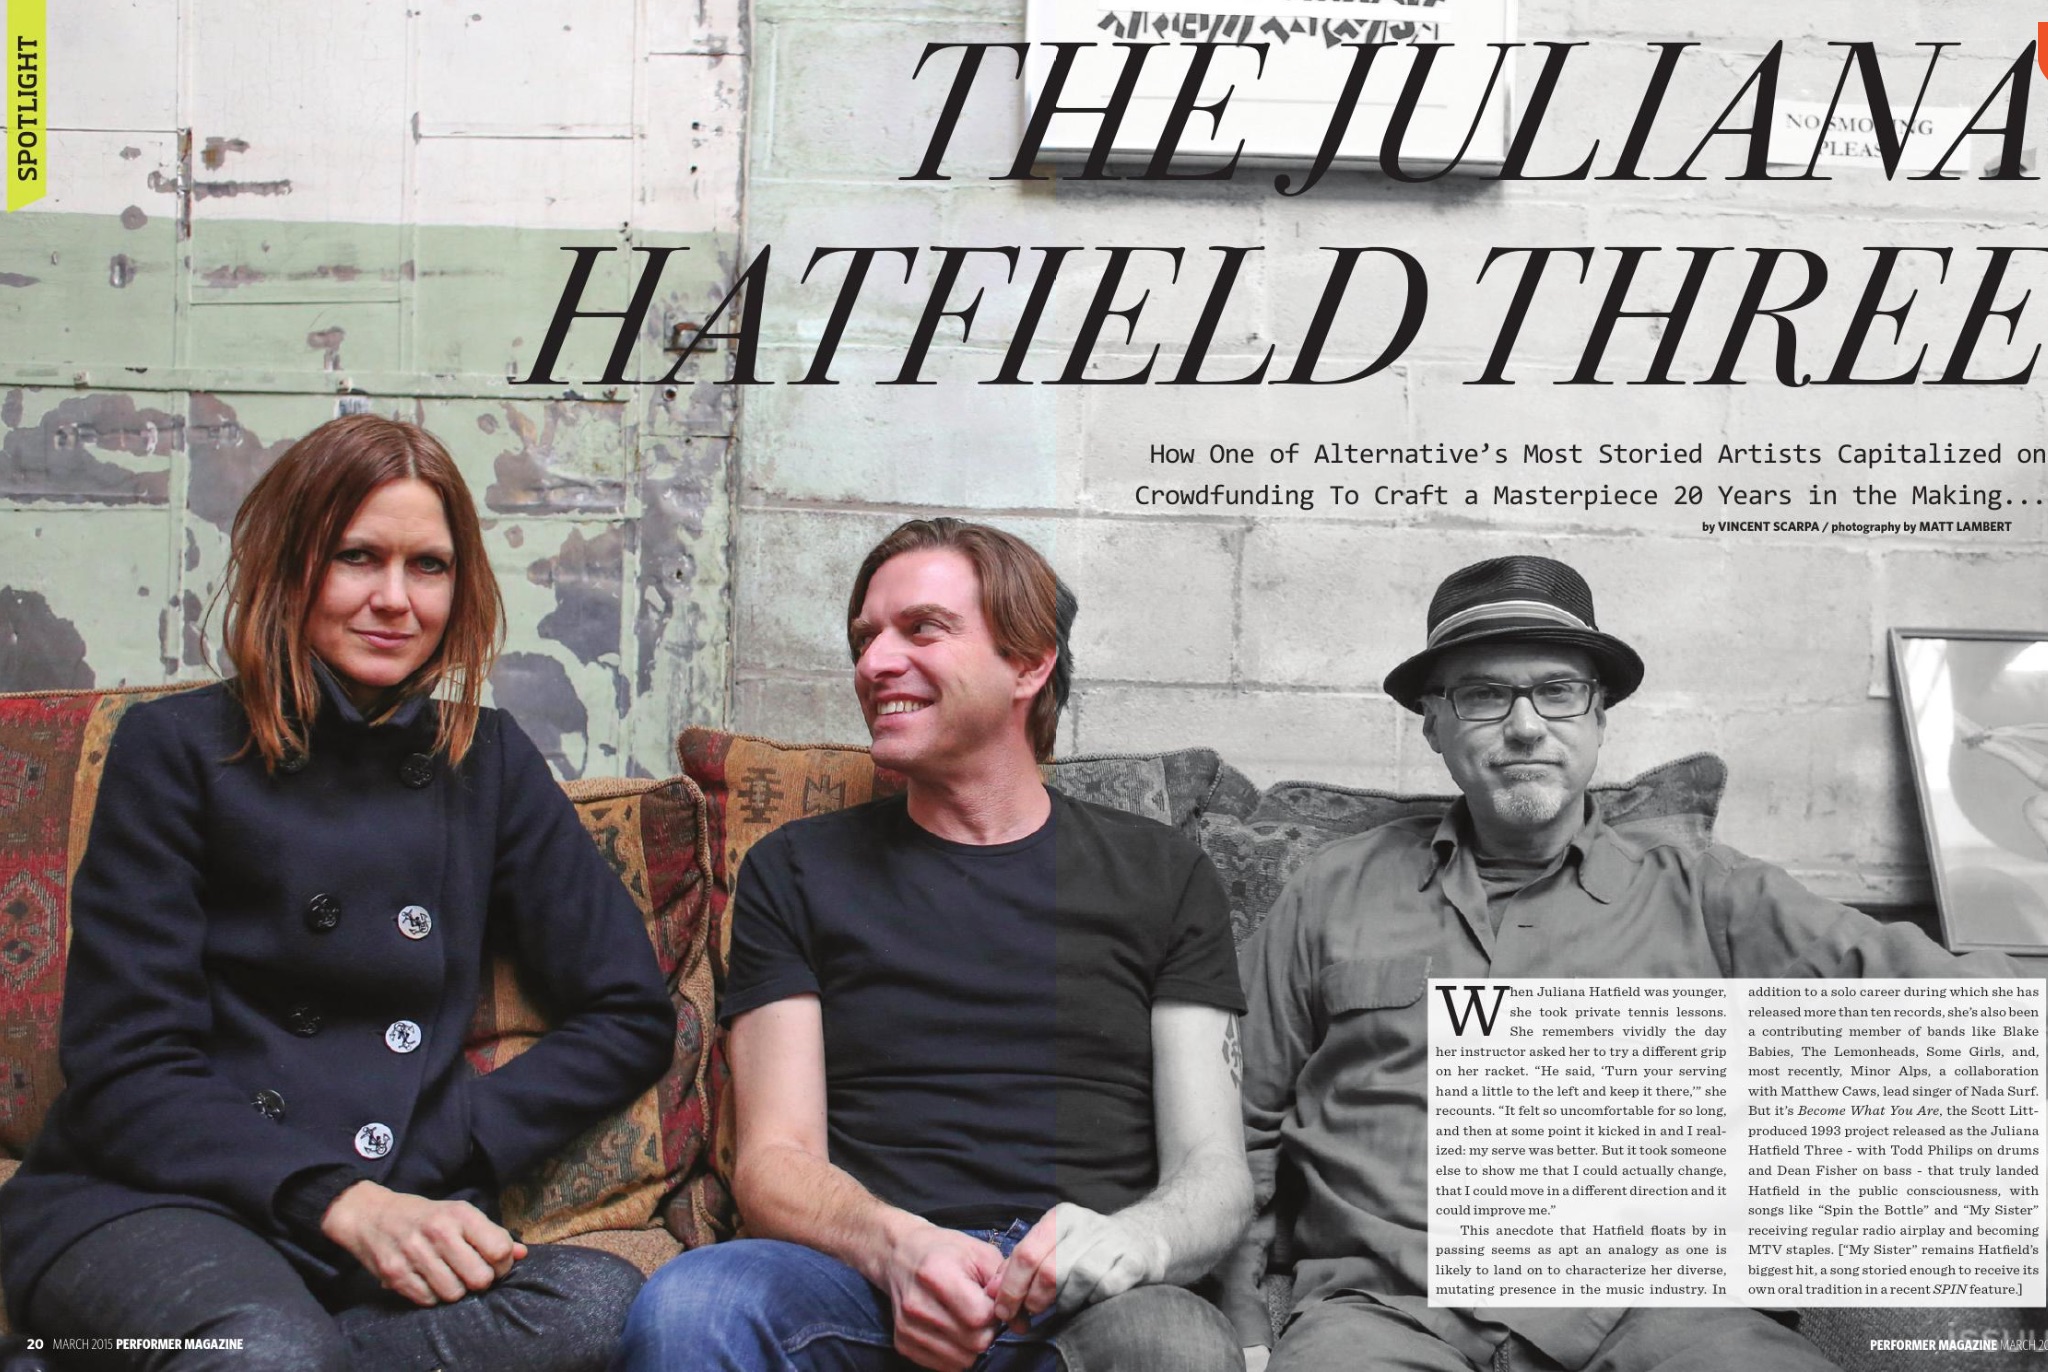 Juliana Hatfield: Our March 1994 Cover Story